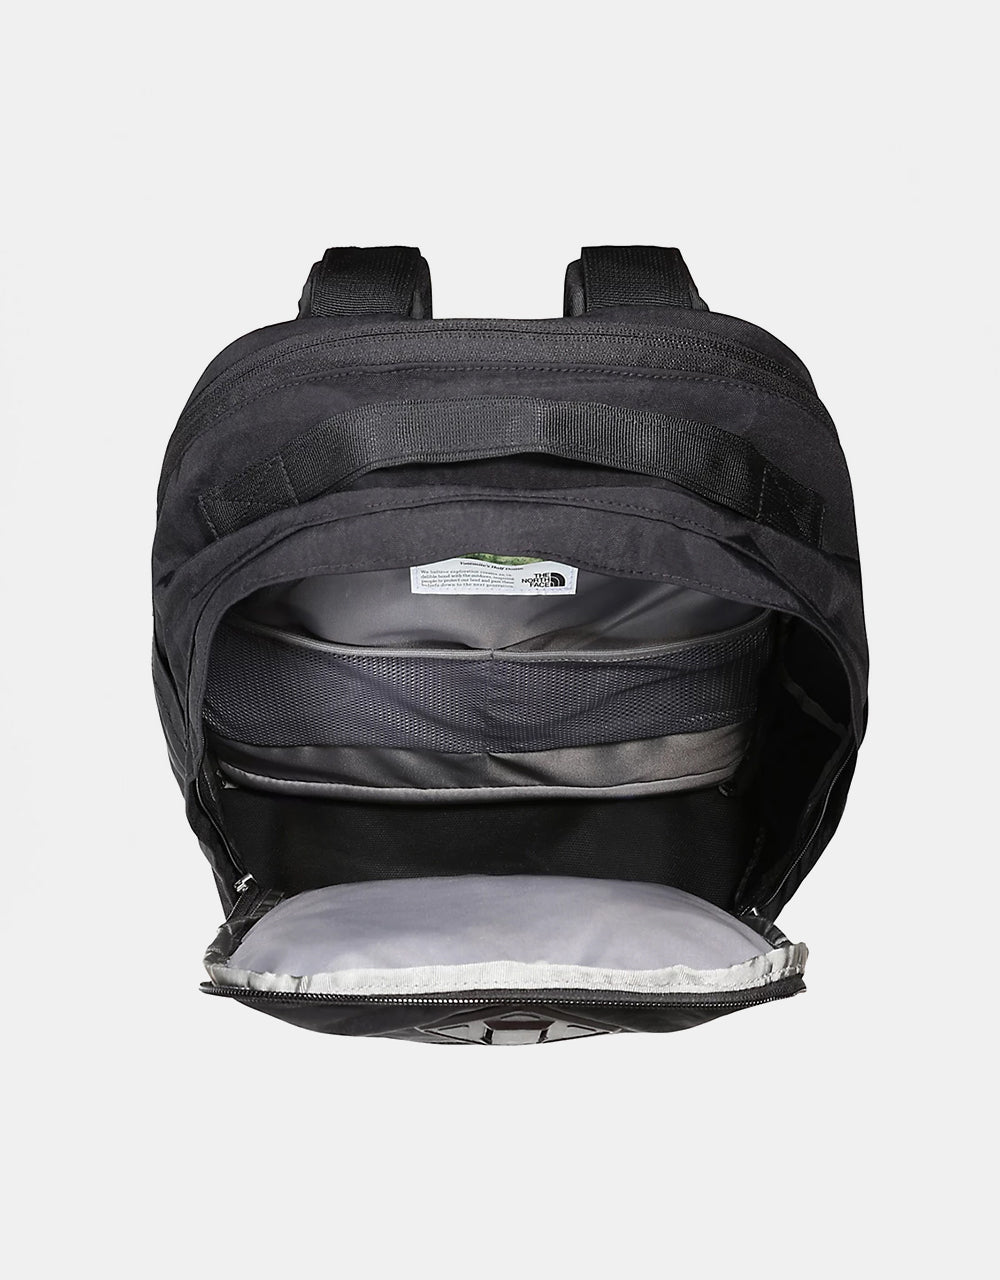 The North Face Berkeley Backpack - TNF Black-Mineral Gold